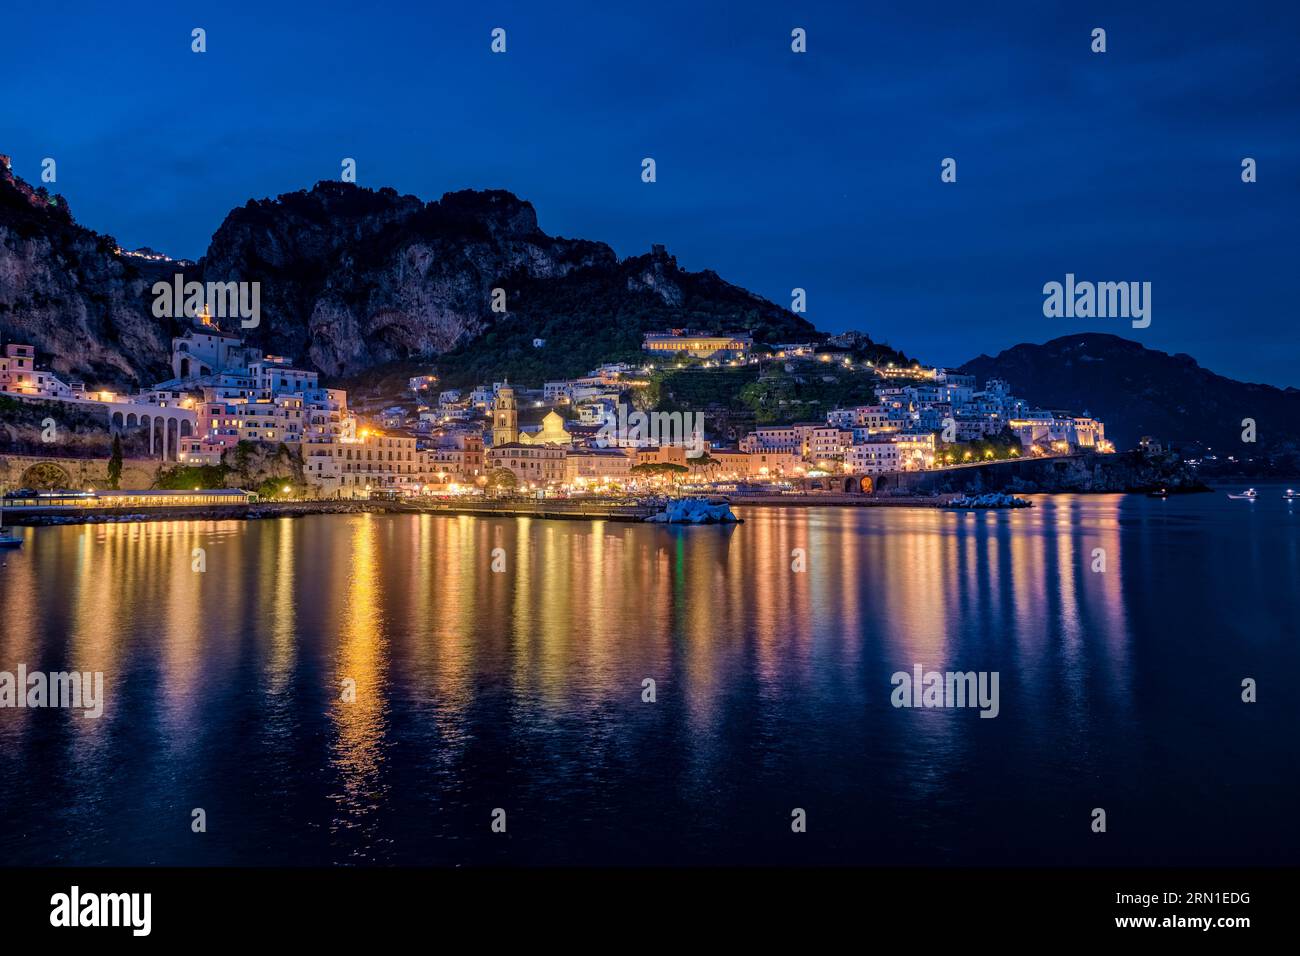 The houses of the town of Amalfi on the Amalfi Coast, illuminated at night, reflecting in the Mediterranean Sea. Stock Photo